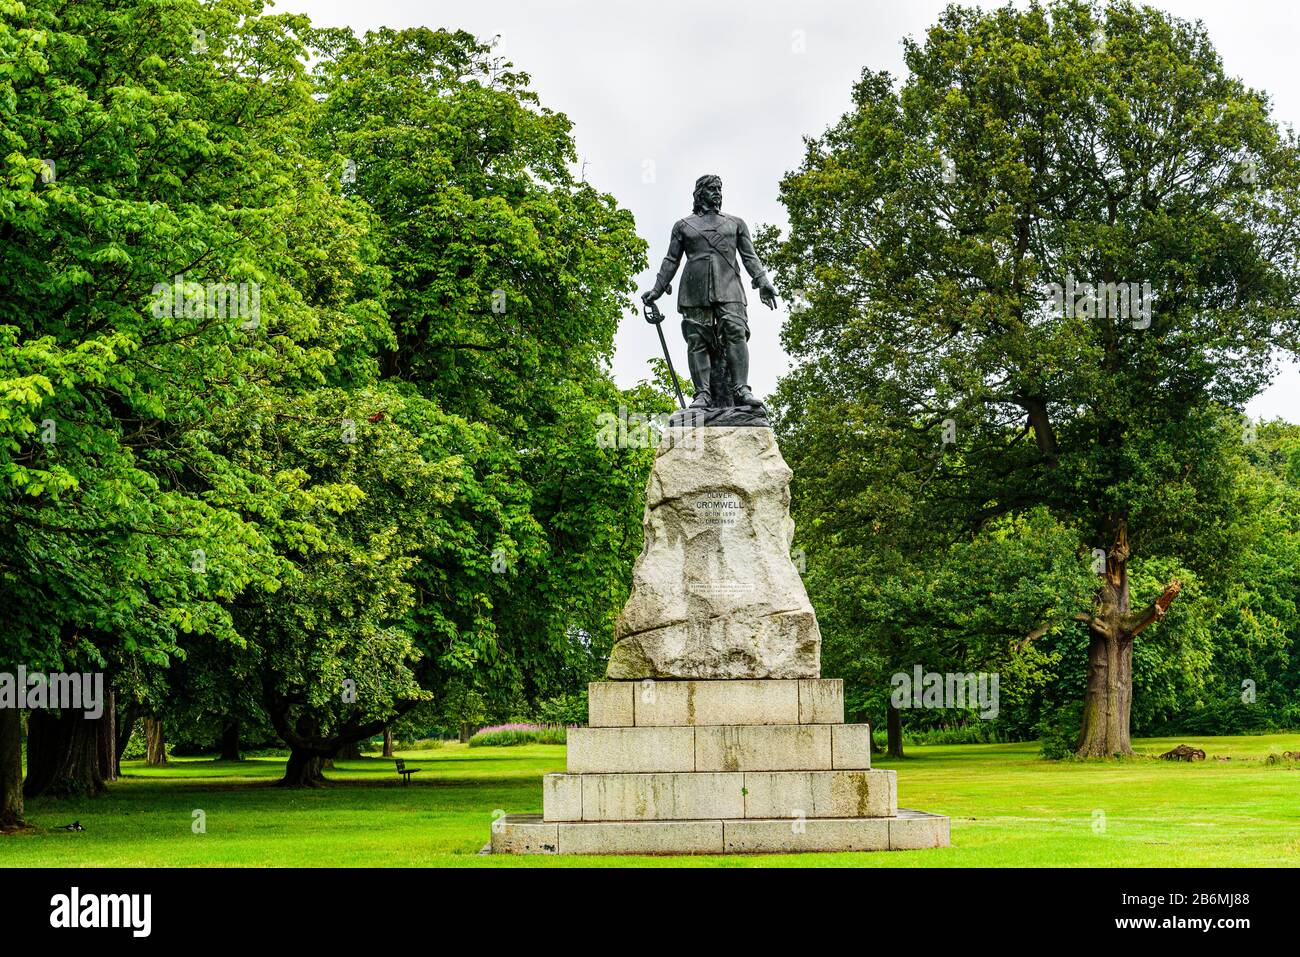 Oliver Cromwell statue, Wythenshawe Park, Manchester Stock Photo